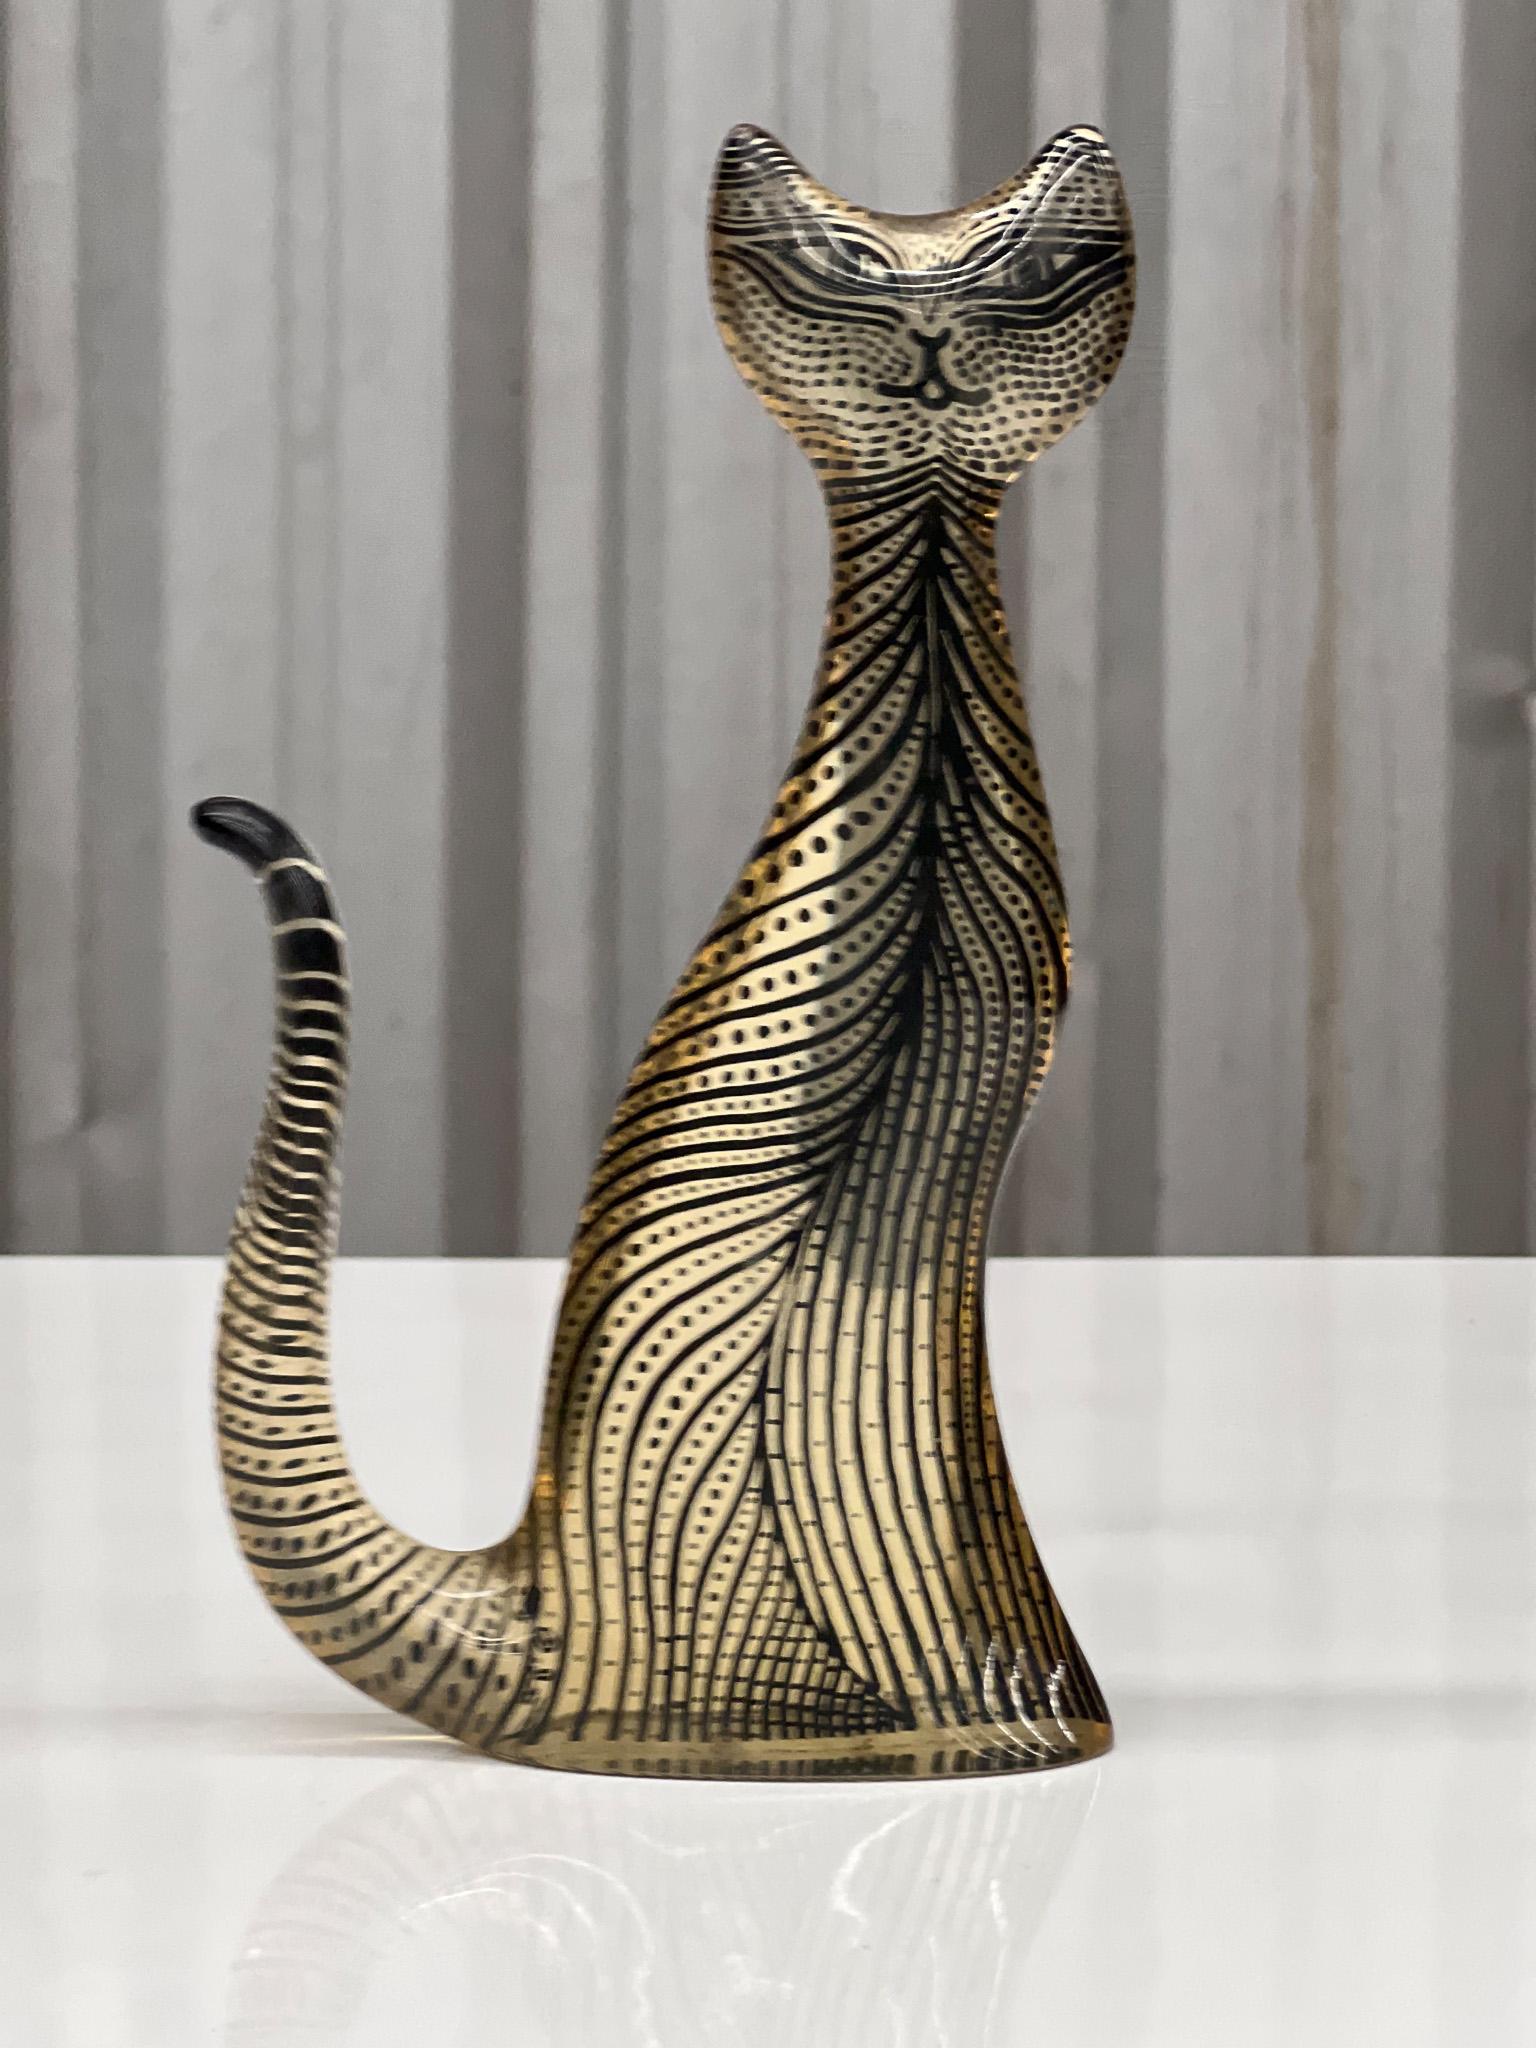 Mid-Century Modern Brazilian Modern Kinetic Sculpture of a Cat in Resin by Abraham Palatinik, 1960s For Sale